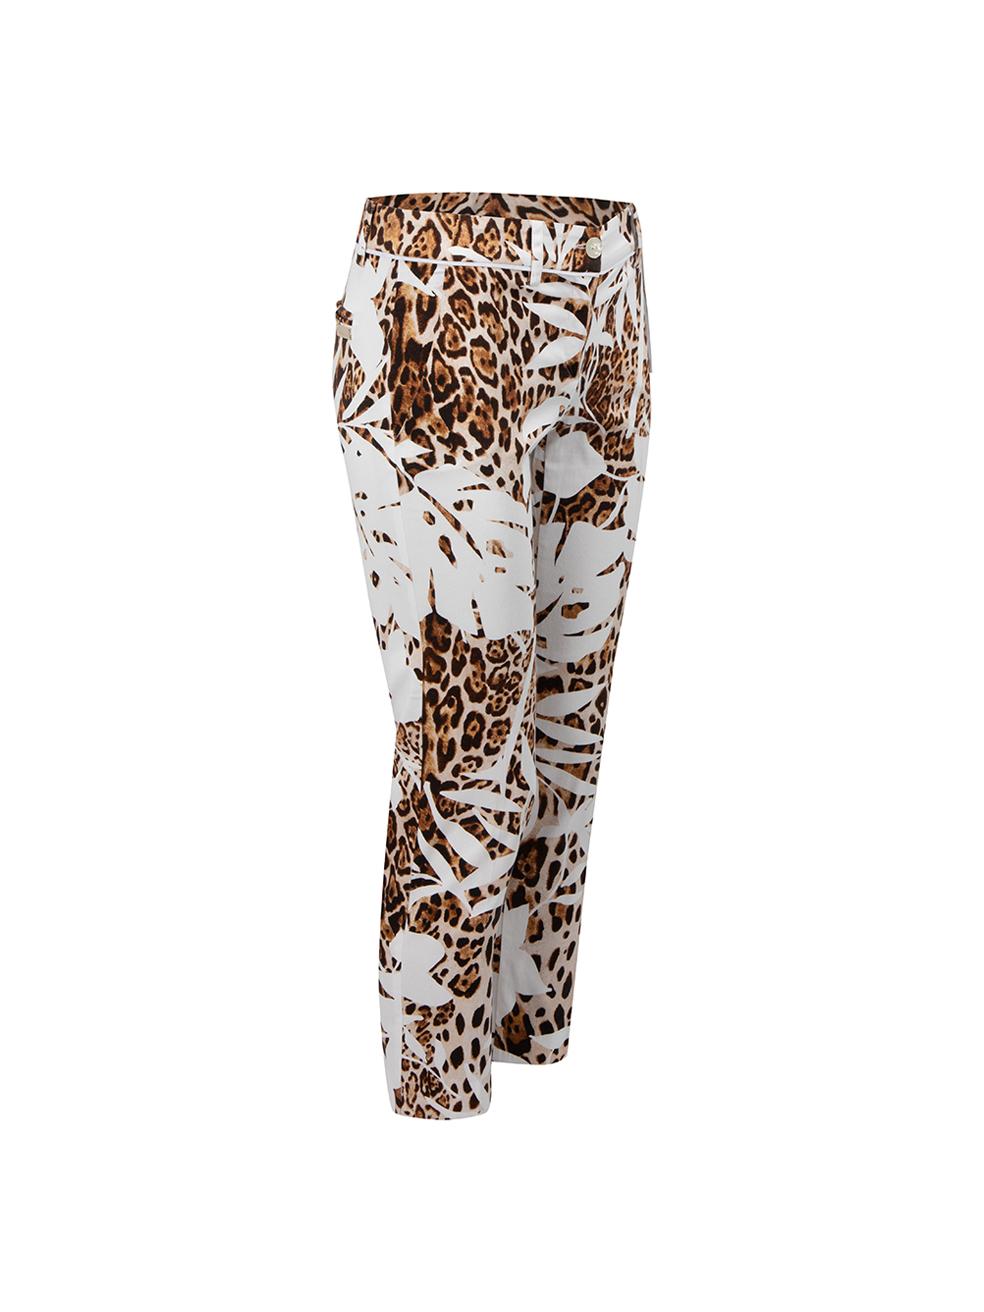 CONDITION is Very good. Hardly any visible wear to trousers is evident on this used Blumarine designer resale item.



Details


White and brown

Cotton

Trousers

Leopard print leaf pattern

Slim fit

Low rise

Cropped leg

2x Side pockets

Zip and